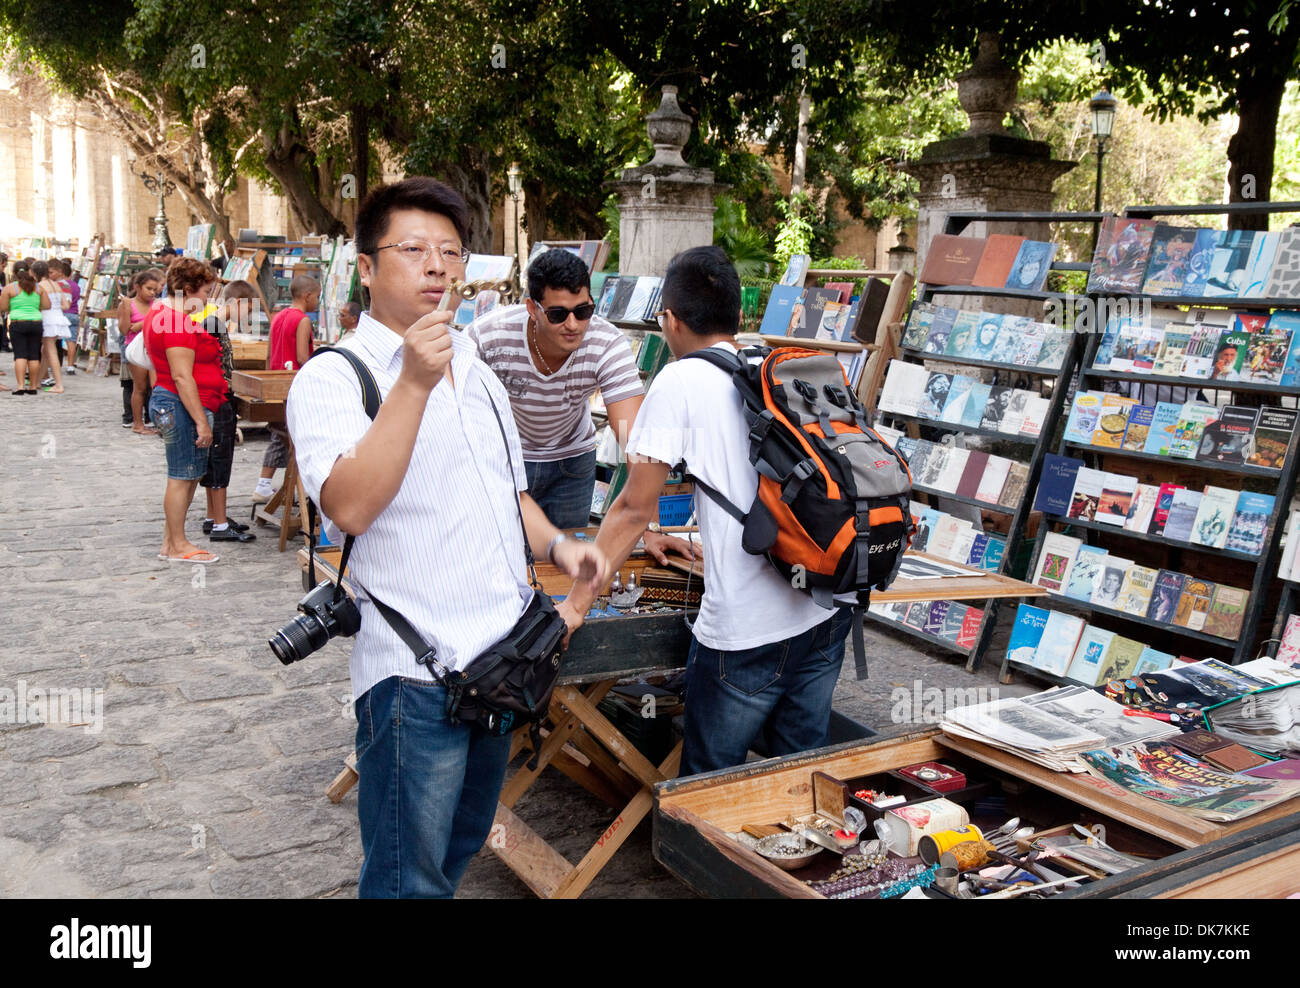 Chinese tourists in Cuba looking at books in the market, Plaza de Armas square, Havana Cuba, Caribbean Stock Photo